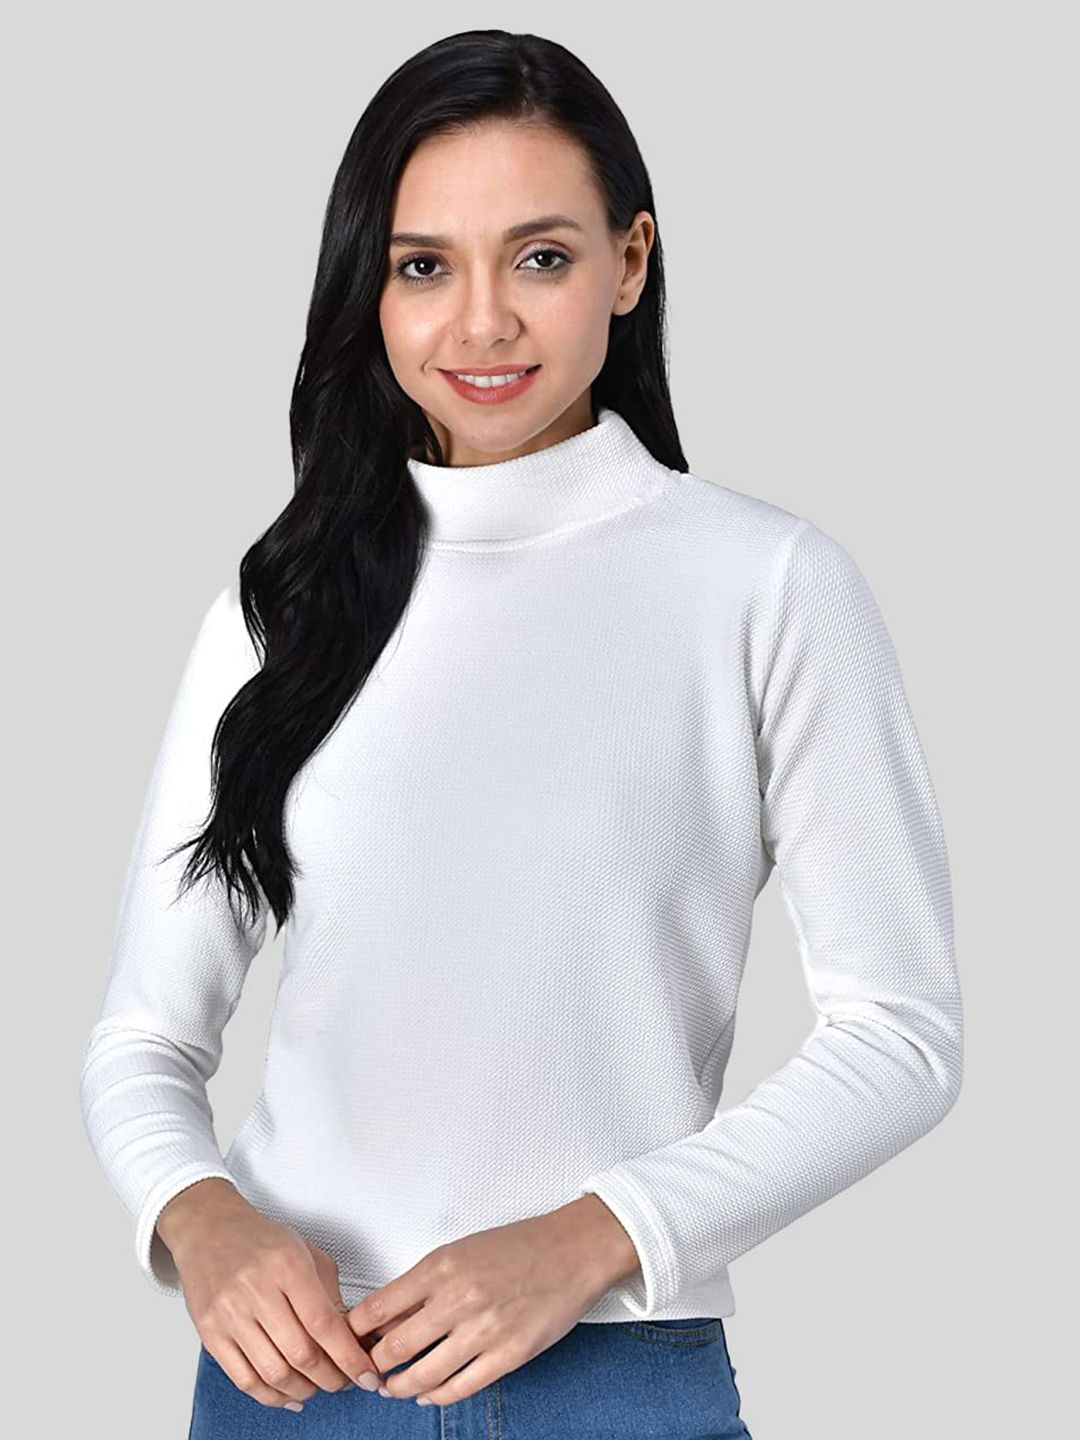 Womenster White High Neck Top Price in India